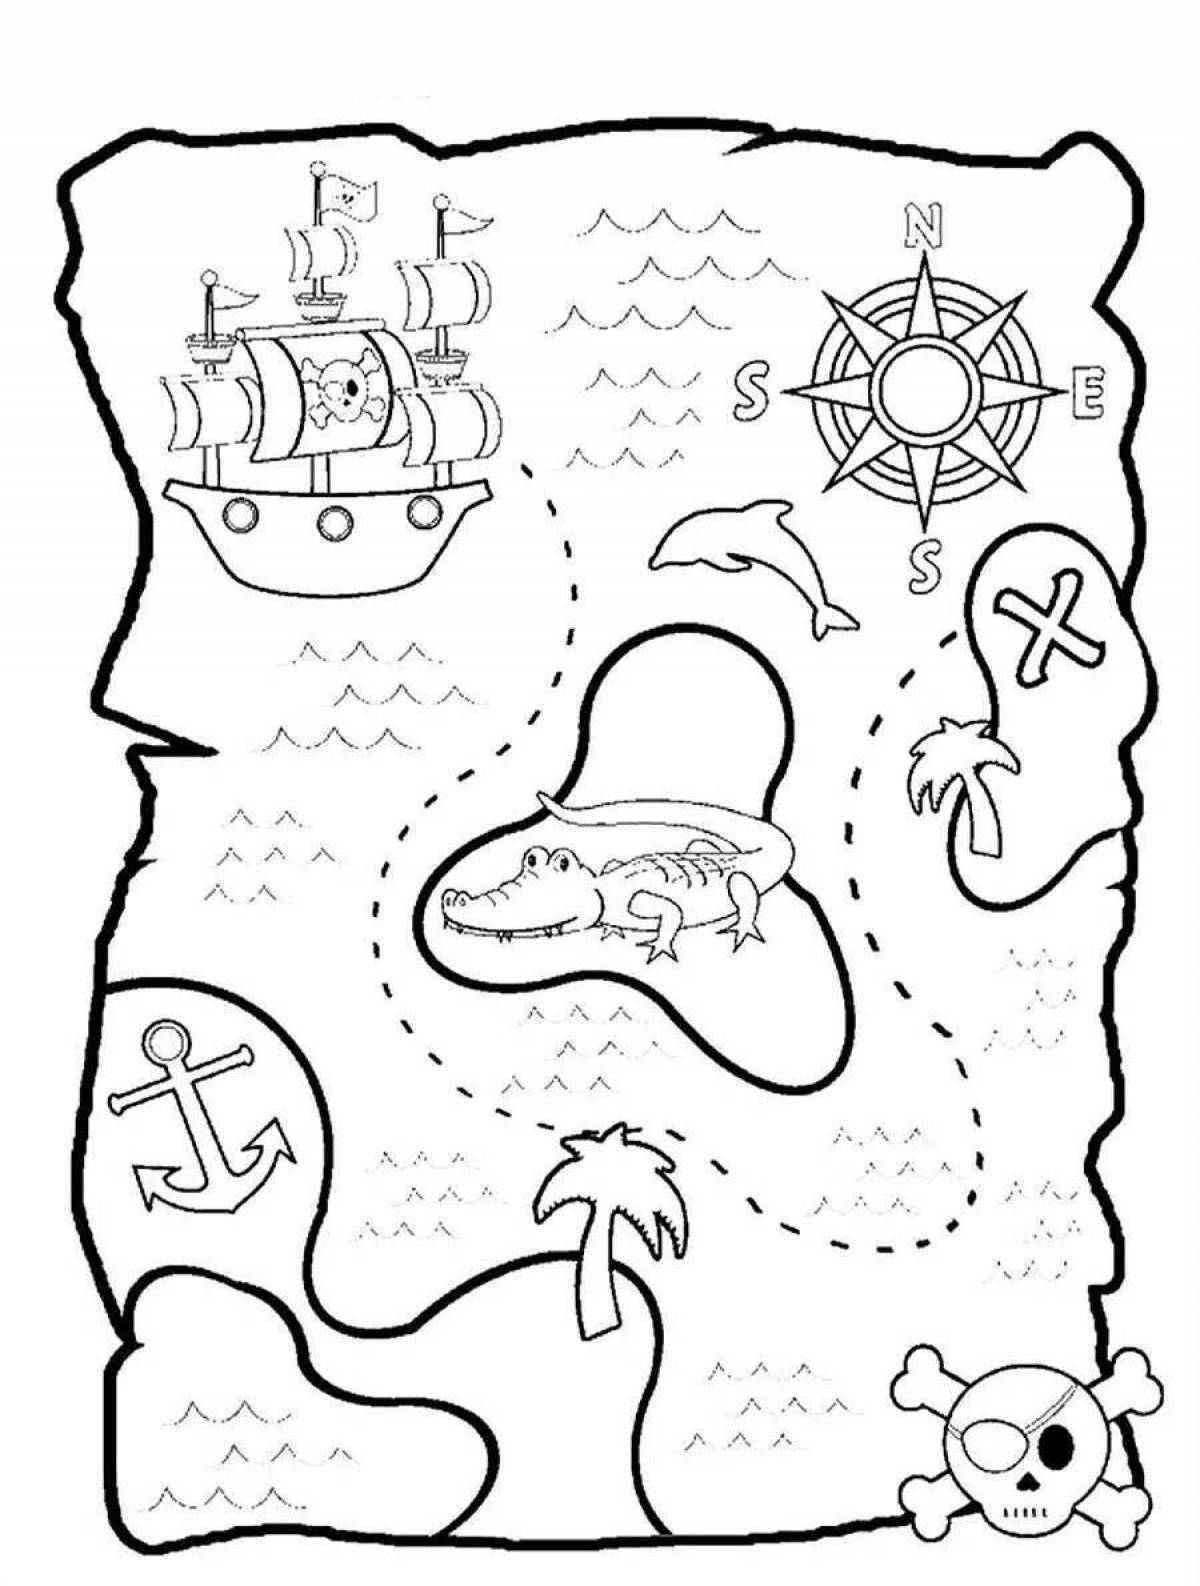 Pirate Treasure Shiny Map Coloring Page